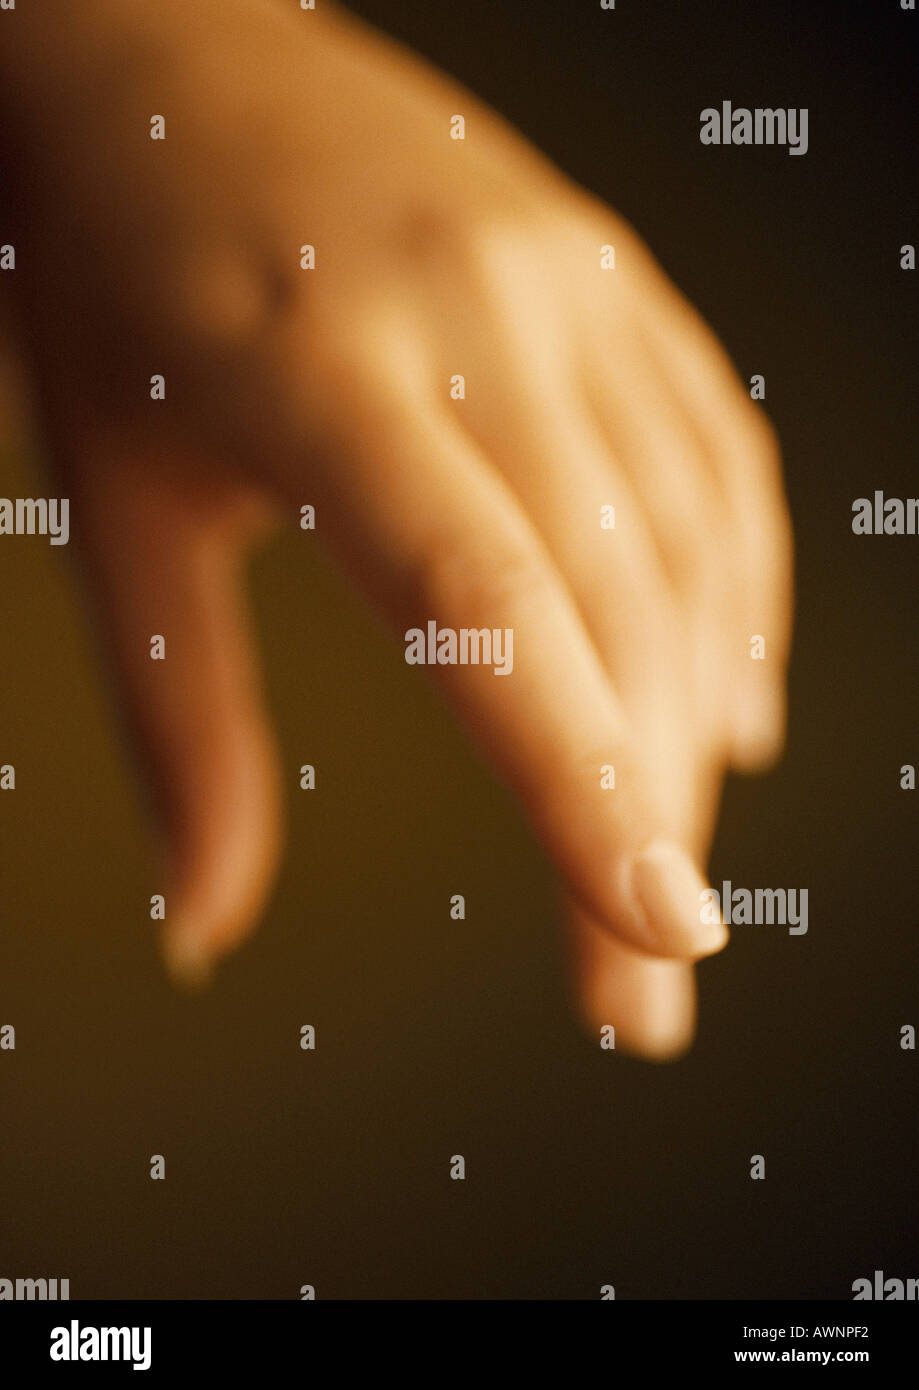 Woman's hand, close-up, blurred Banque D'Images